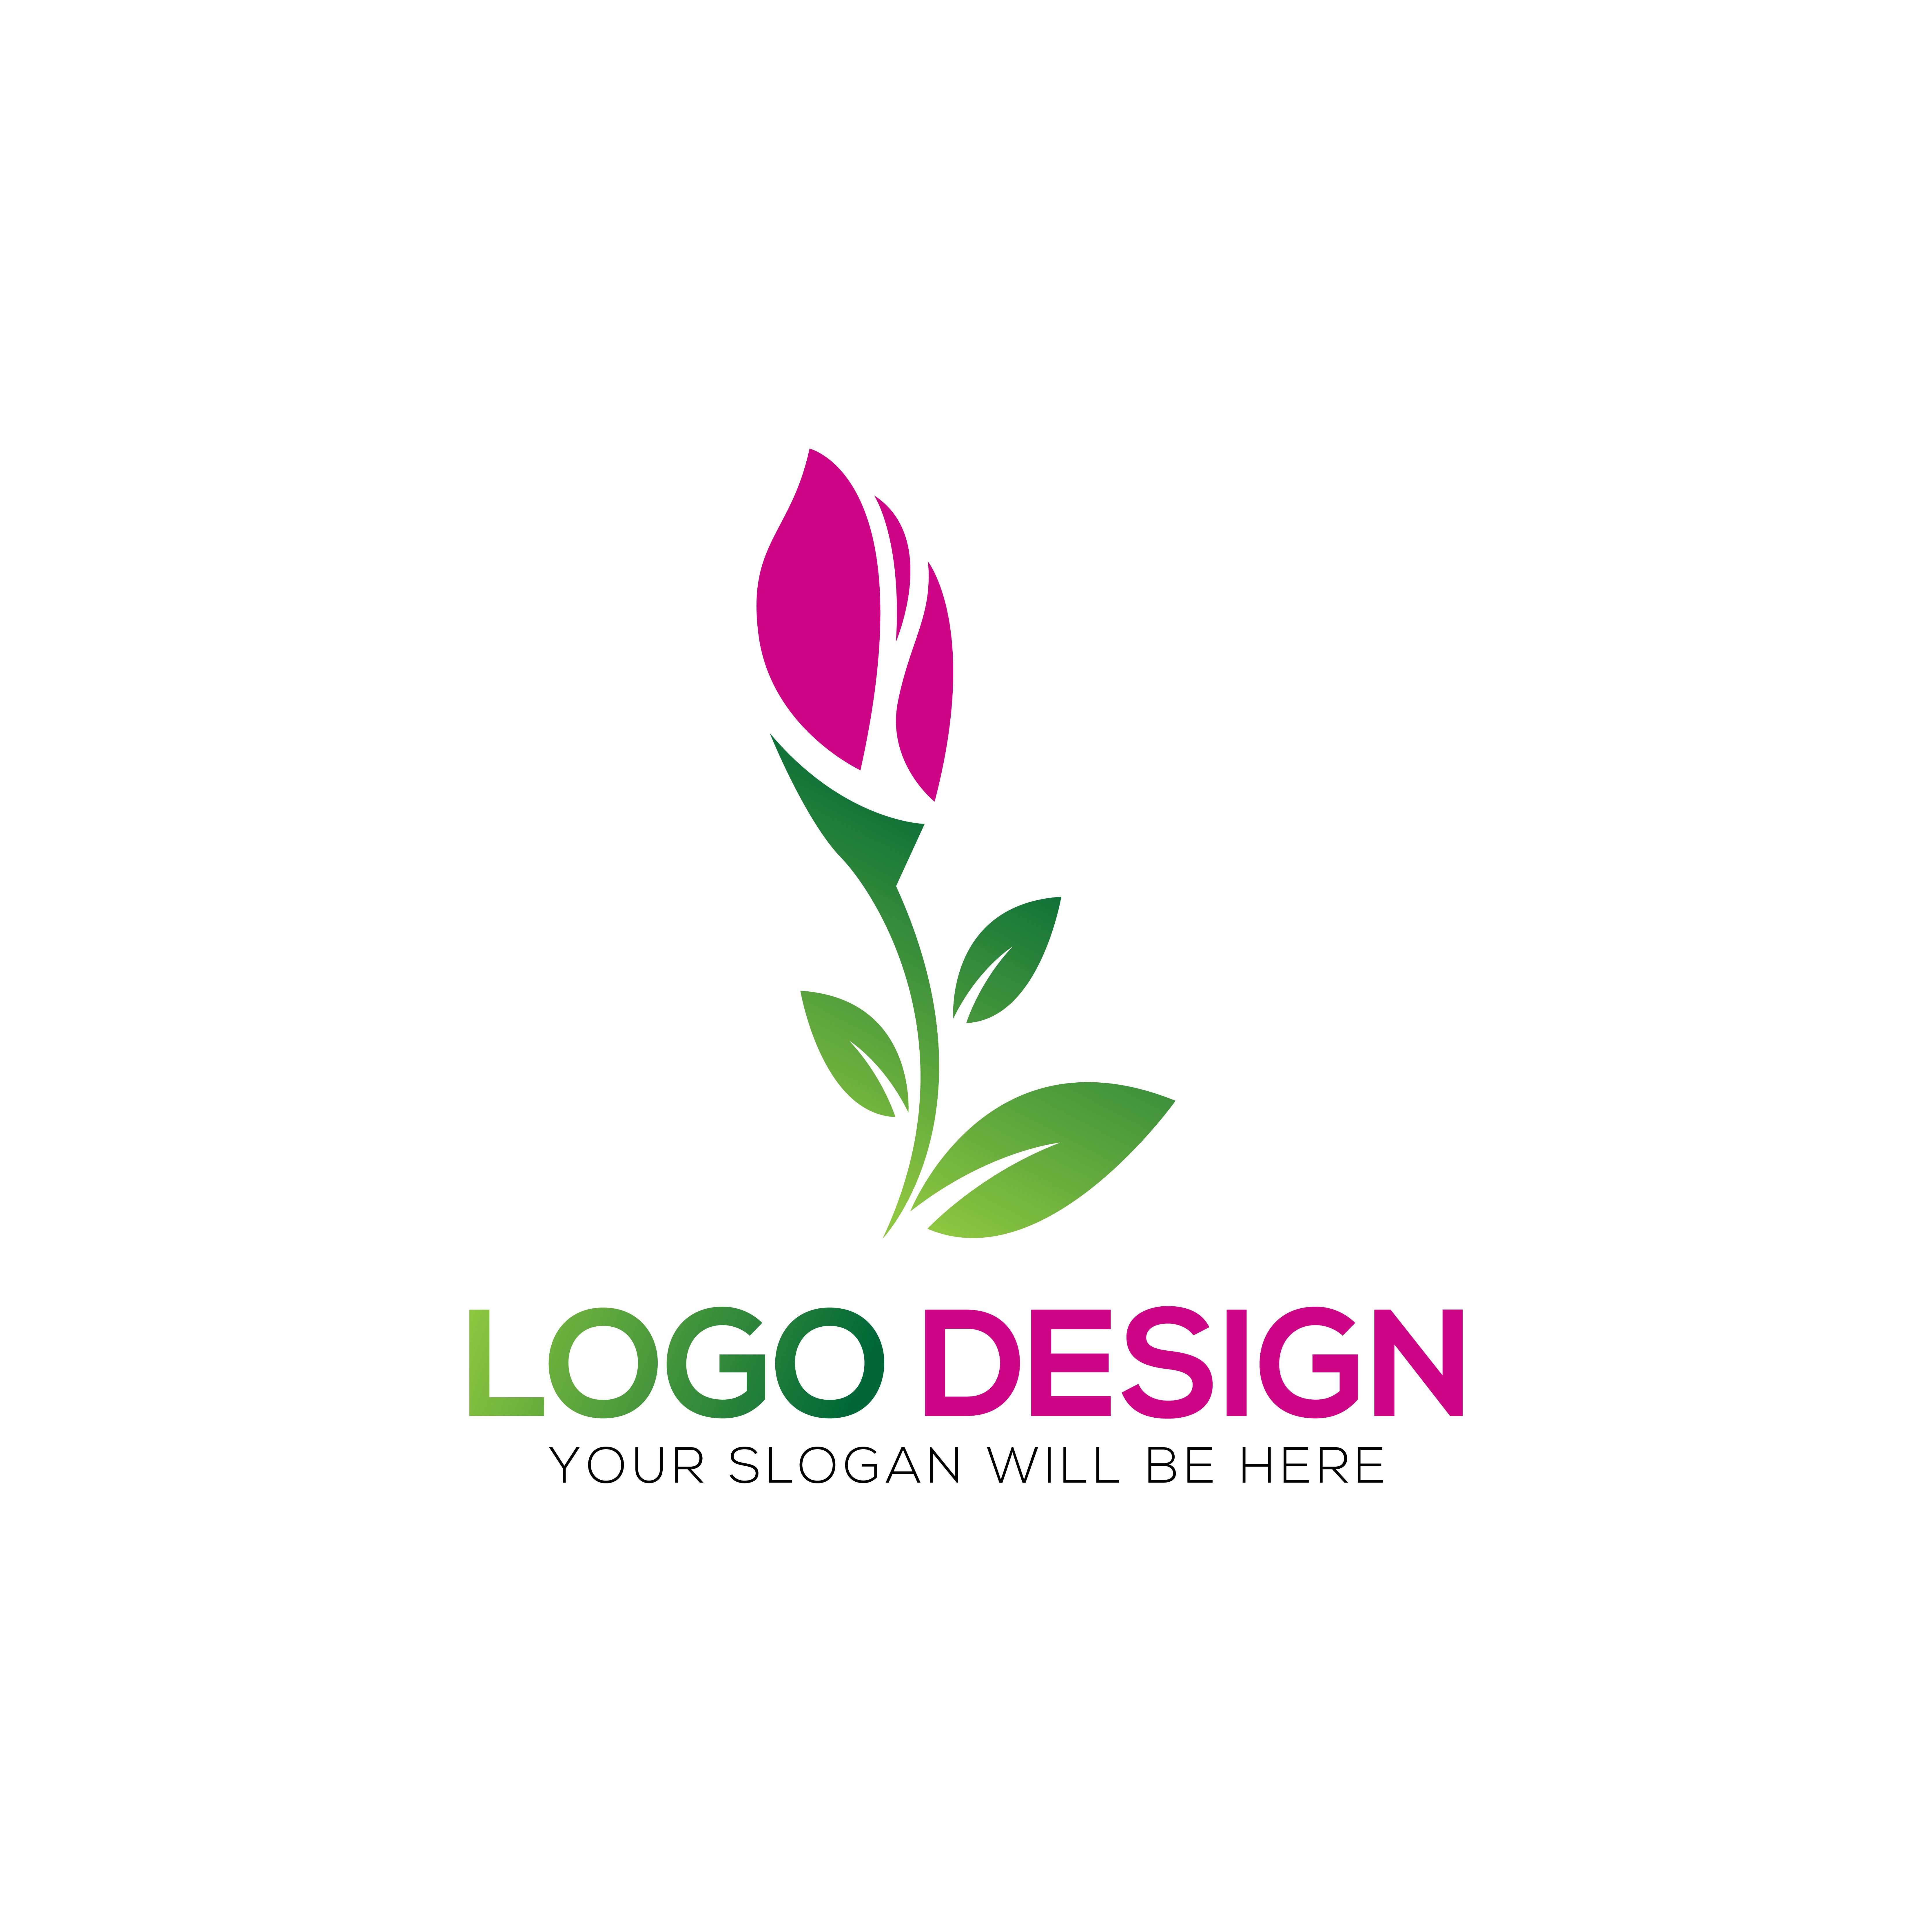 Download Flower Logo Vector at Vectorified.com | Collection of ...